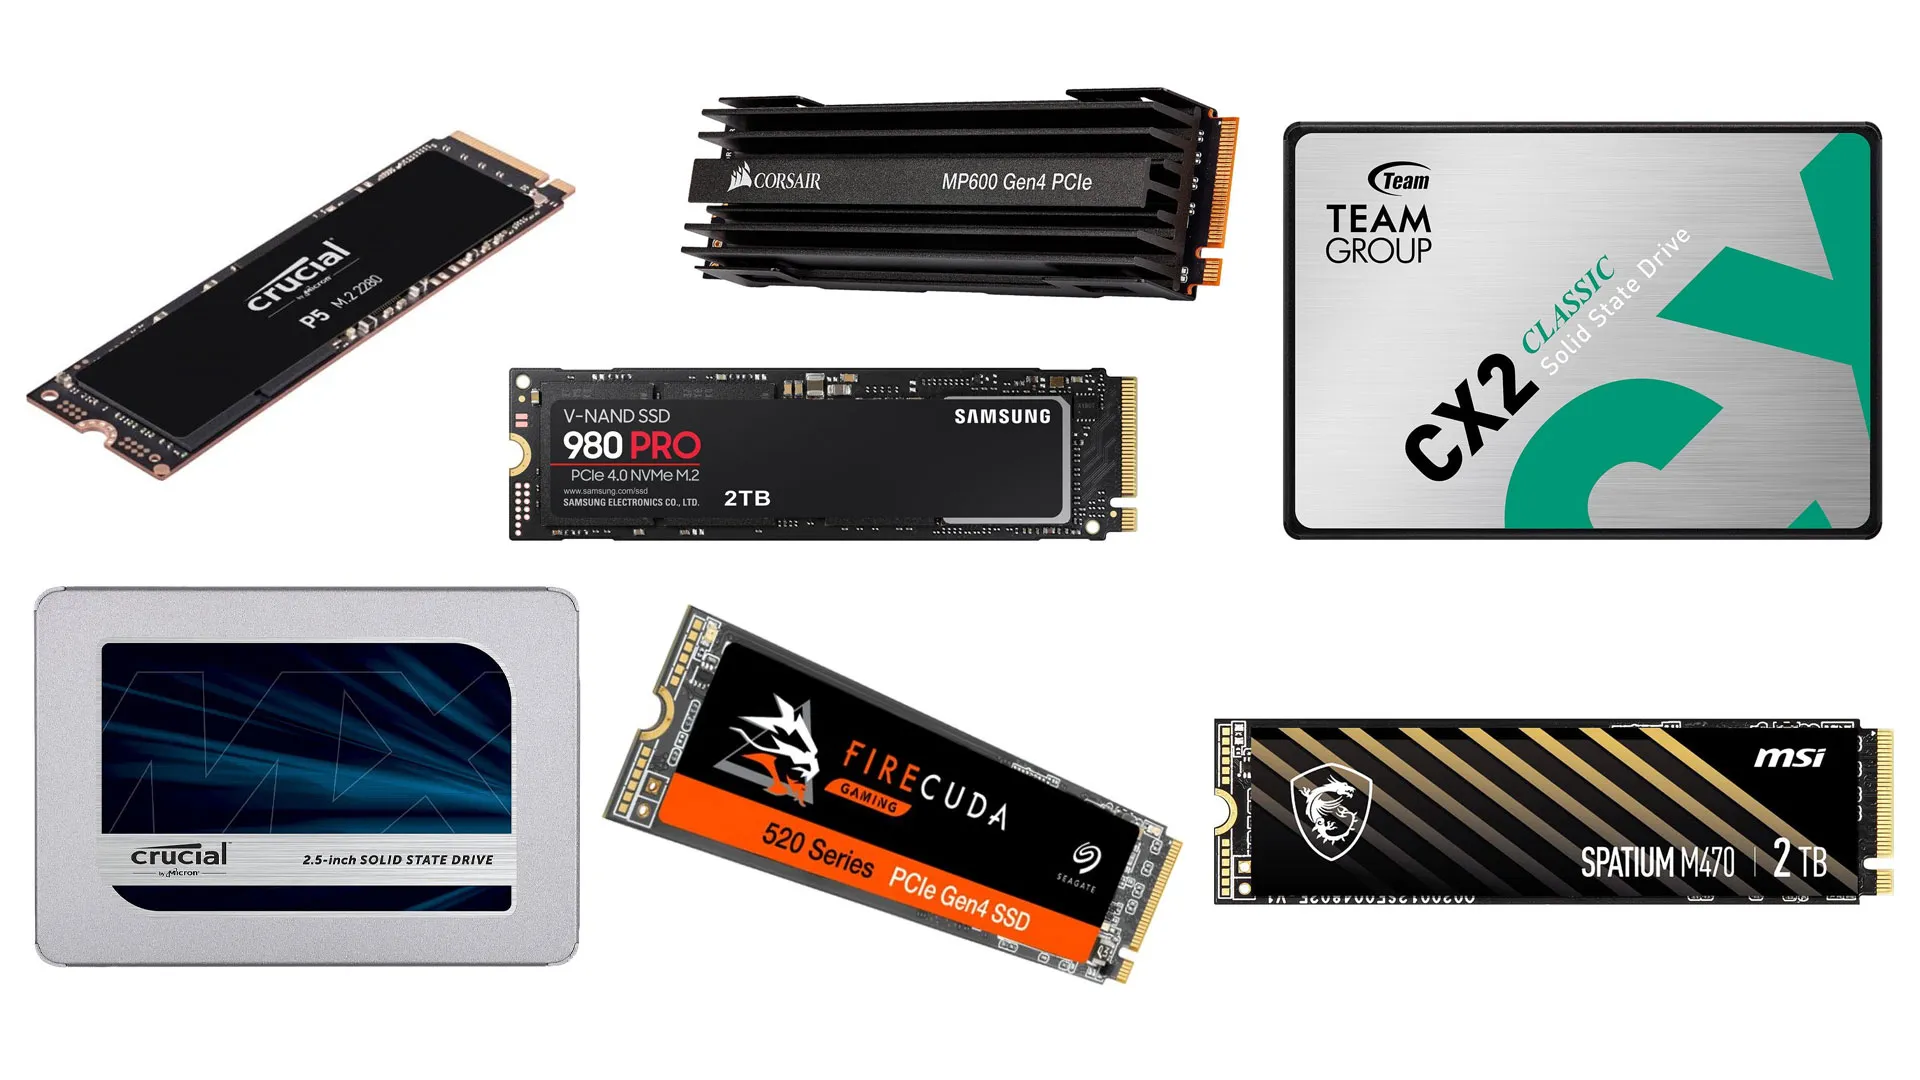 SSD prices may drop performance and value